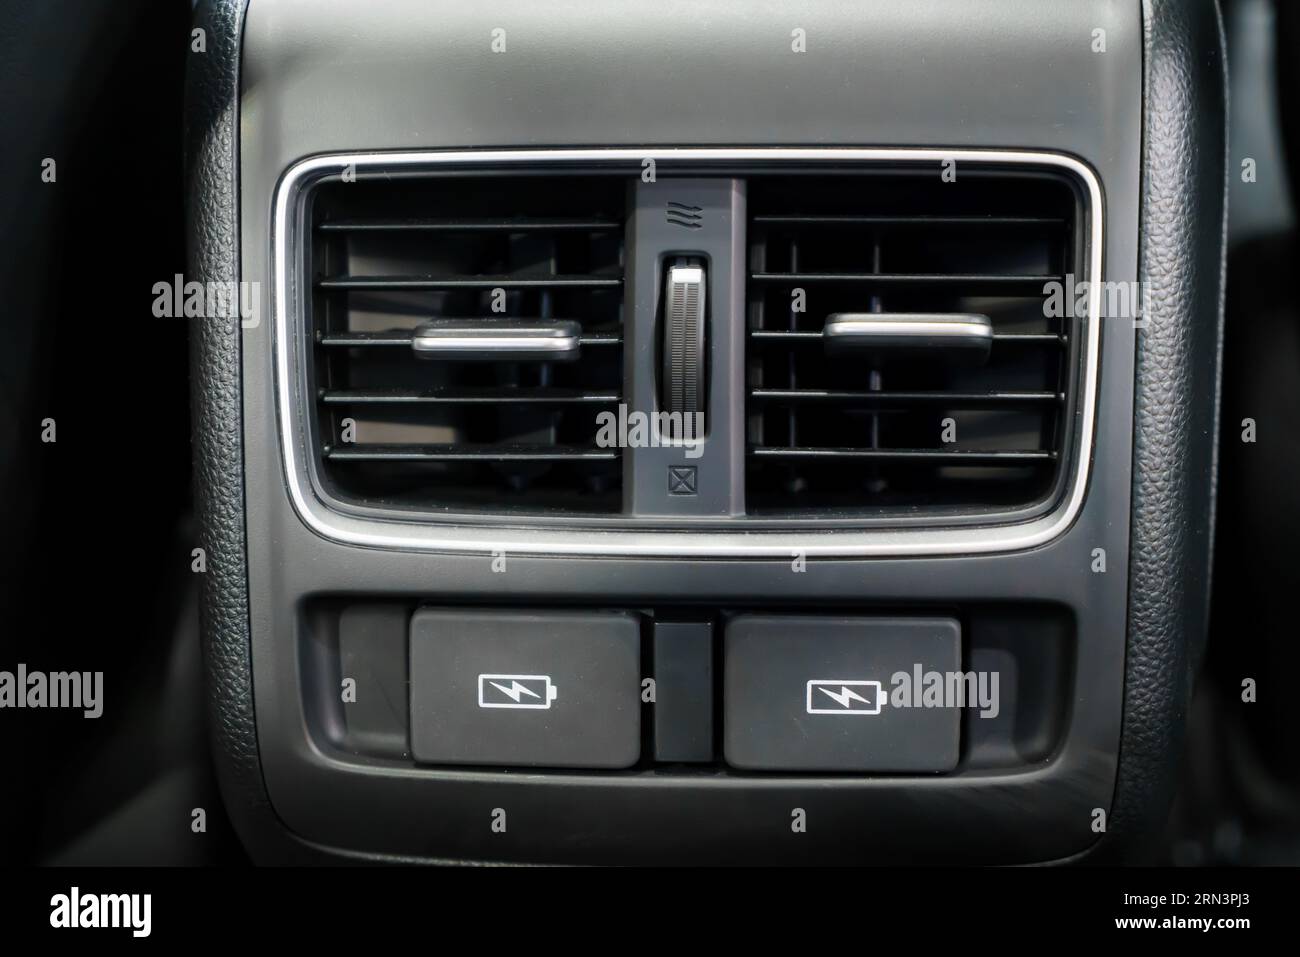 Zoom in on car panel's USB port, a tech oasis amidst leather and chrome. Power and connectivity elegantly fuse, inviting endless journeys. Stock Photo